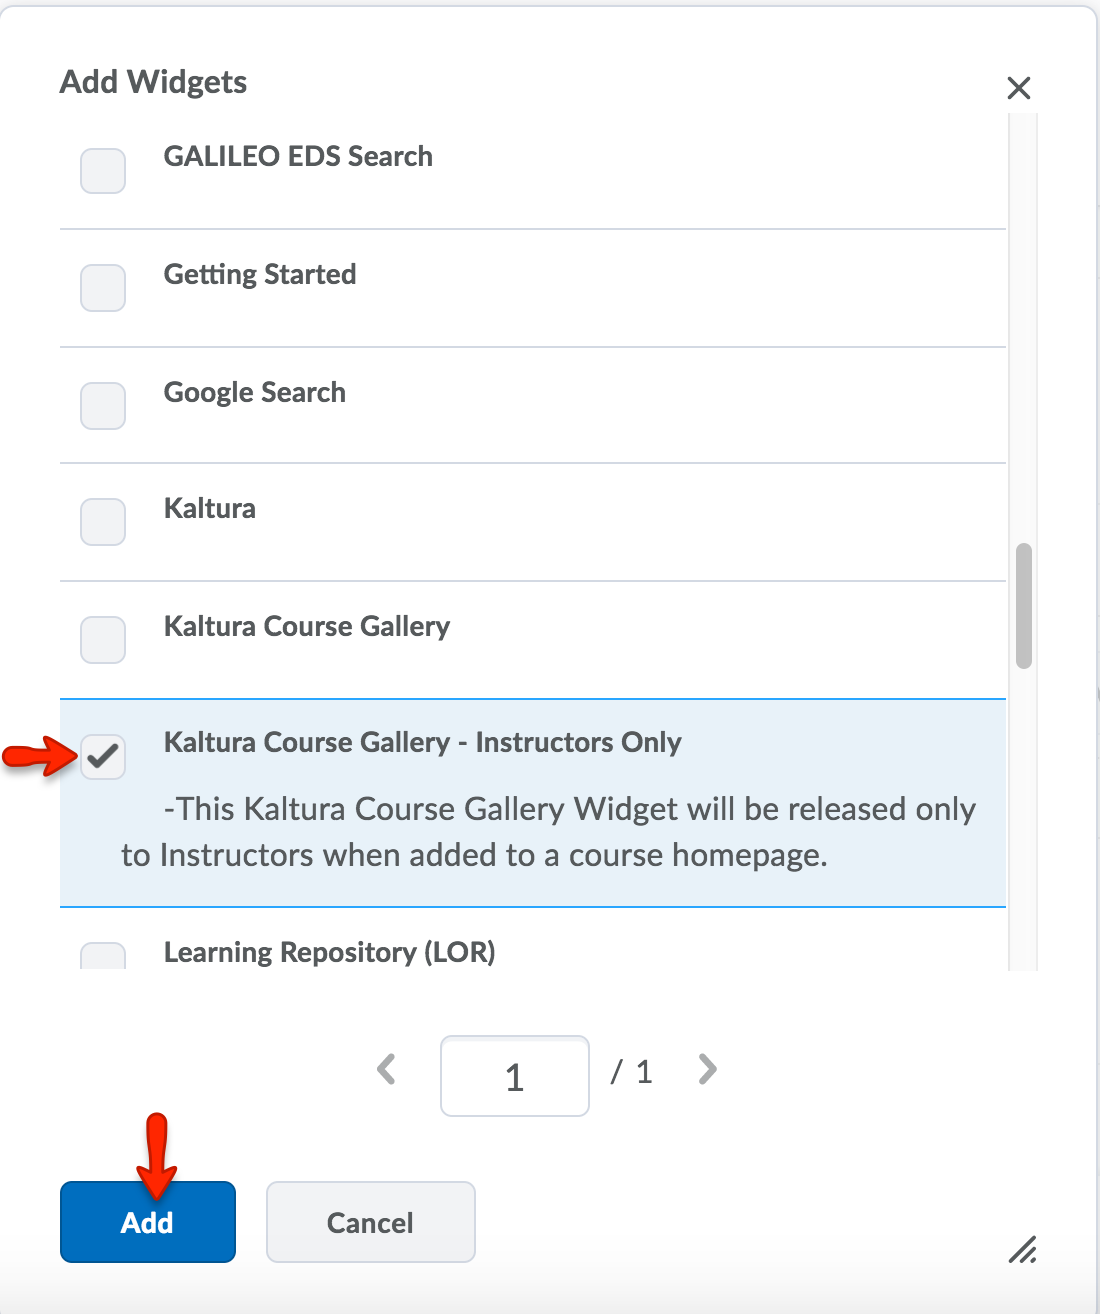 Select Kaltura Course Gallery - Instructors Only. Click Add.